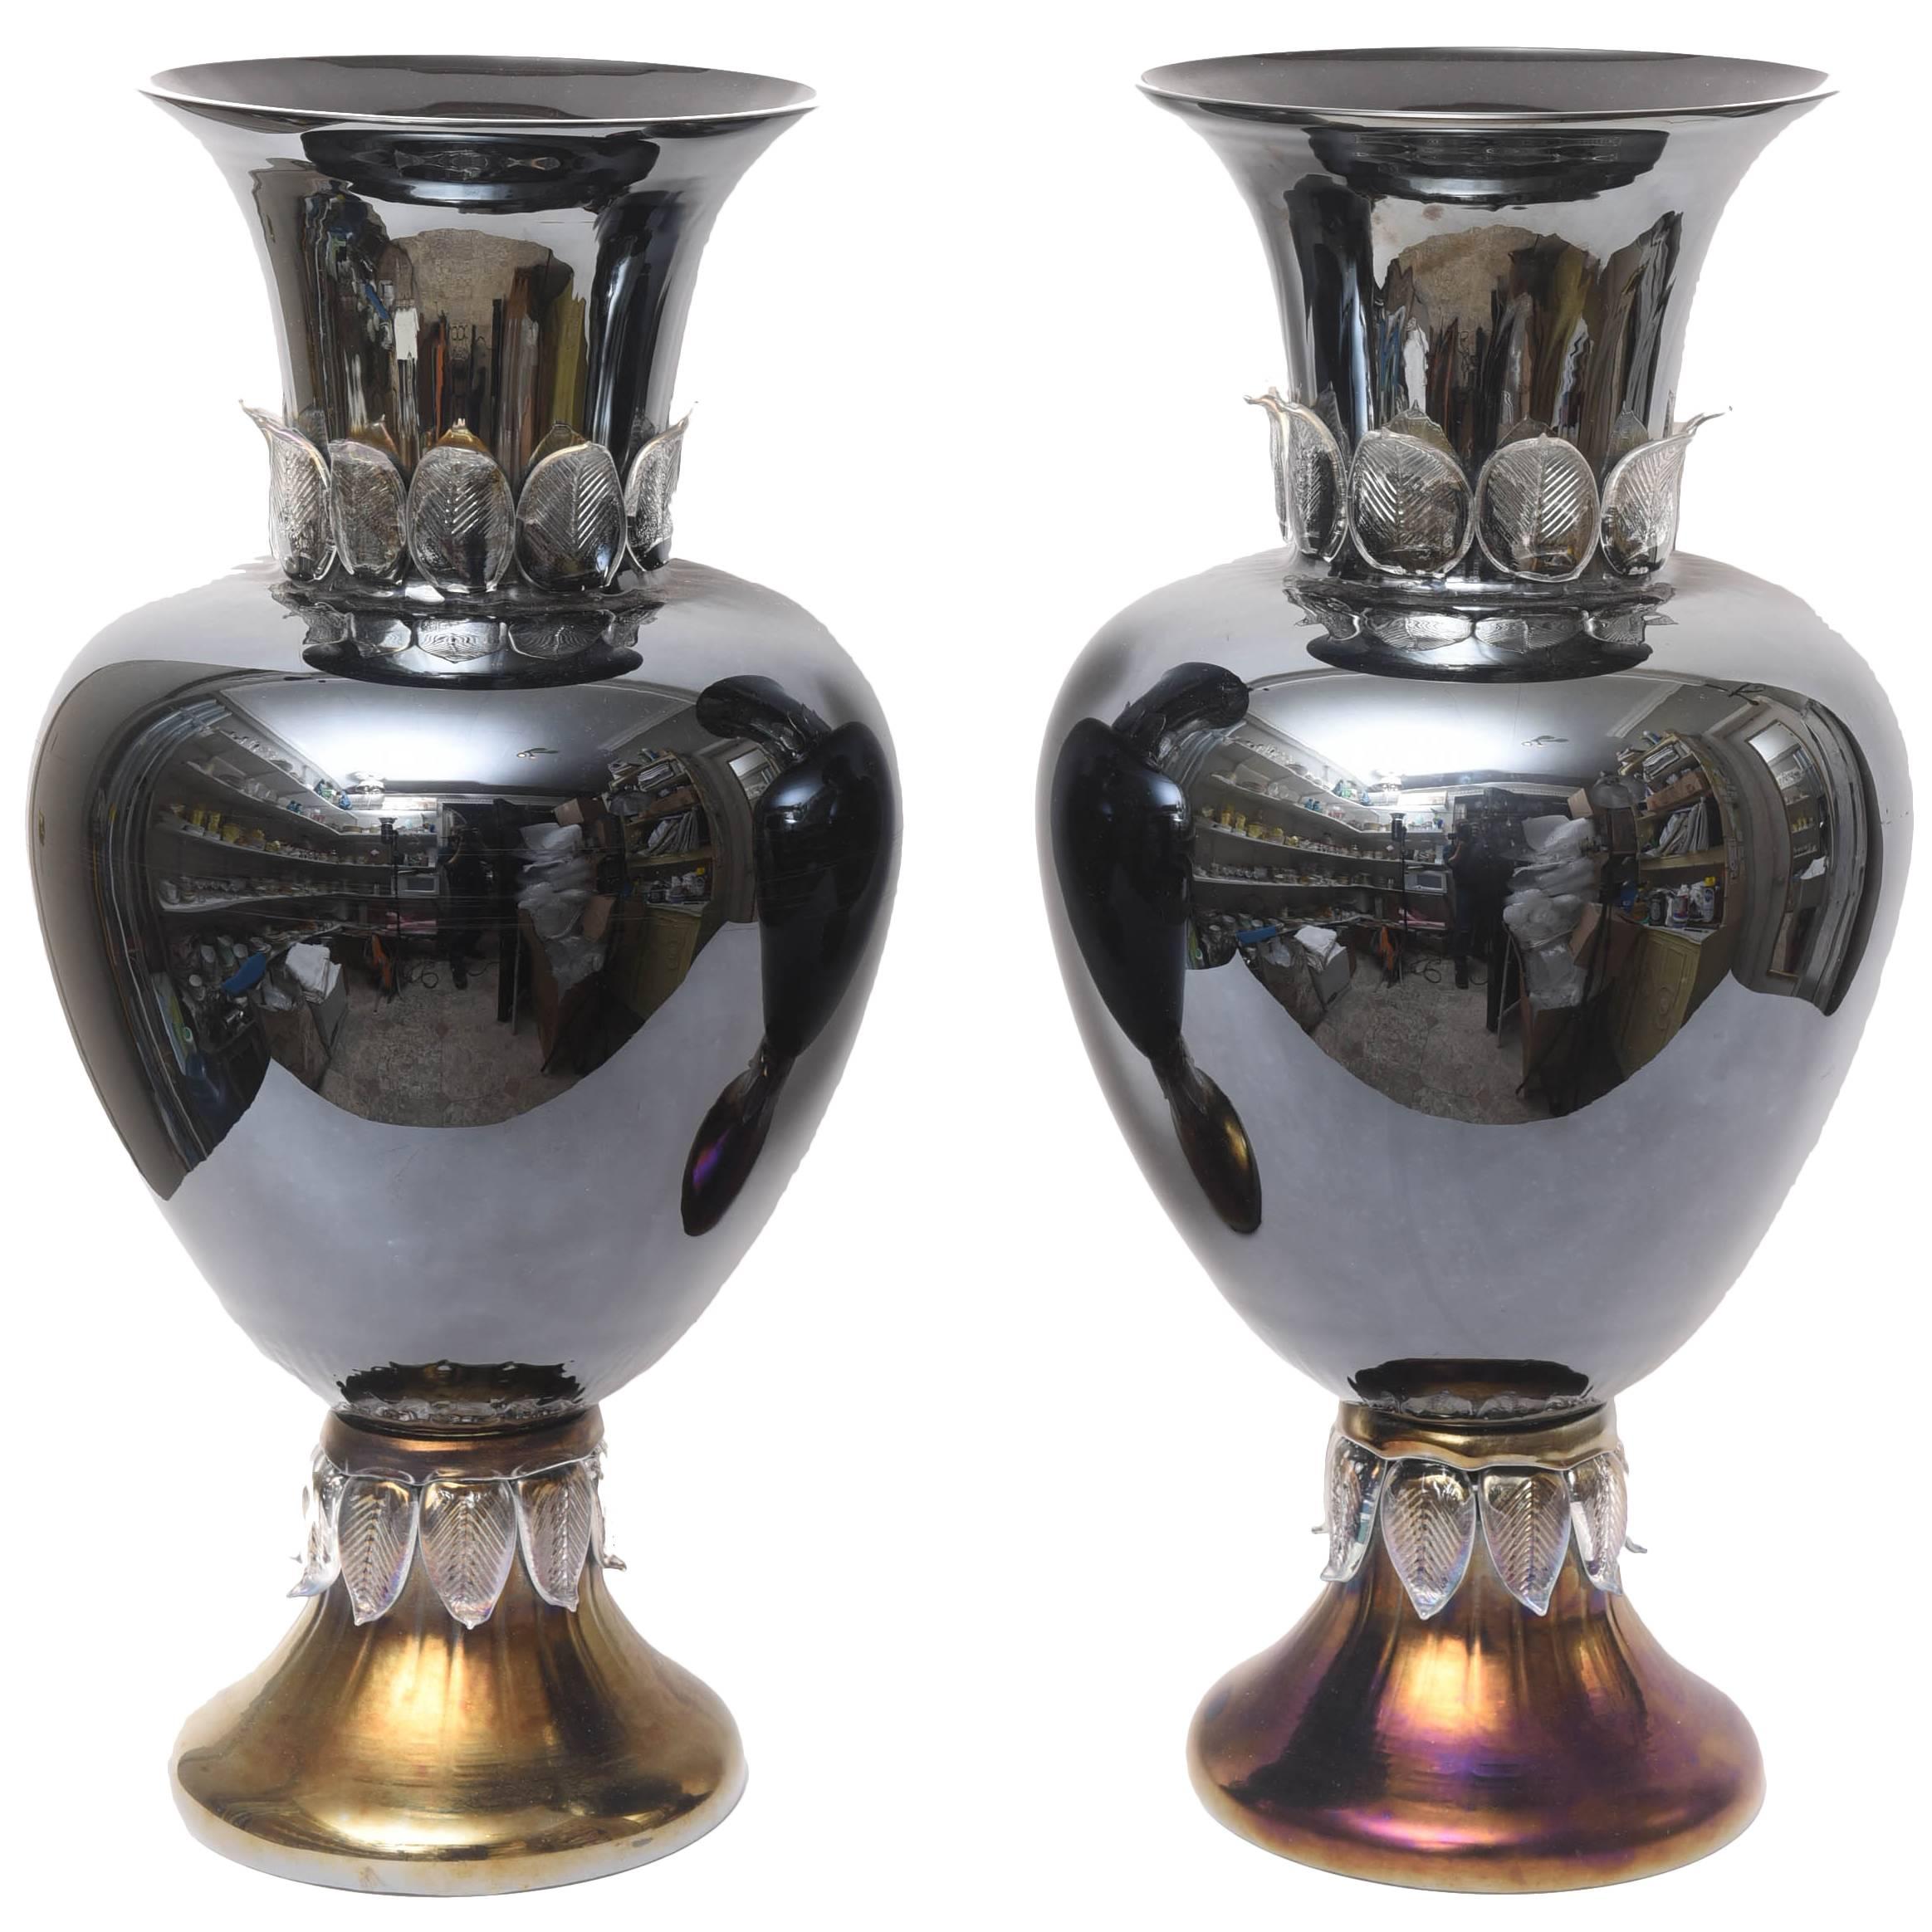 Pair of Very Tall Murano Art Glass Vases, "Cenedese" Black with Colored Bases